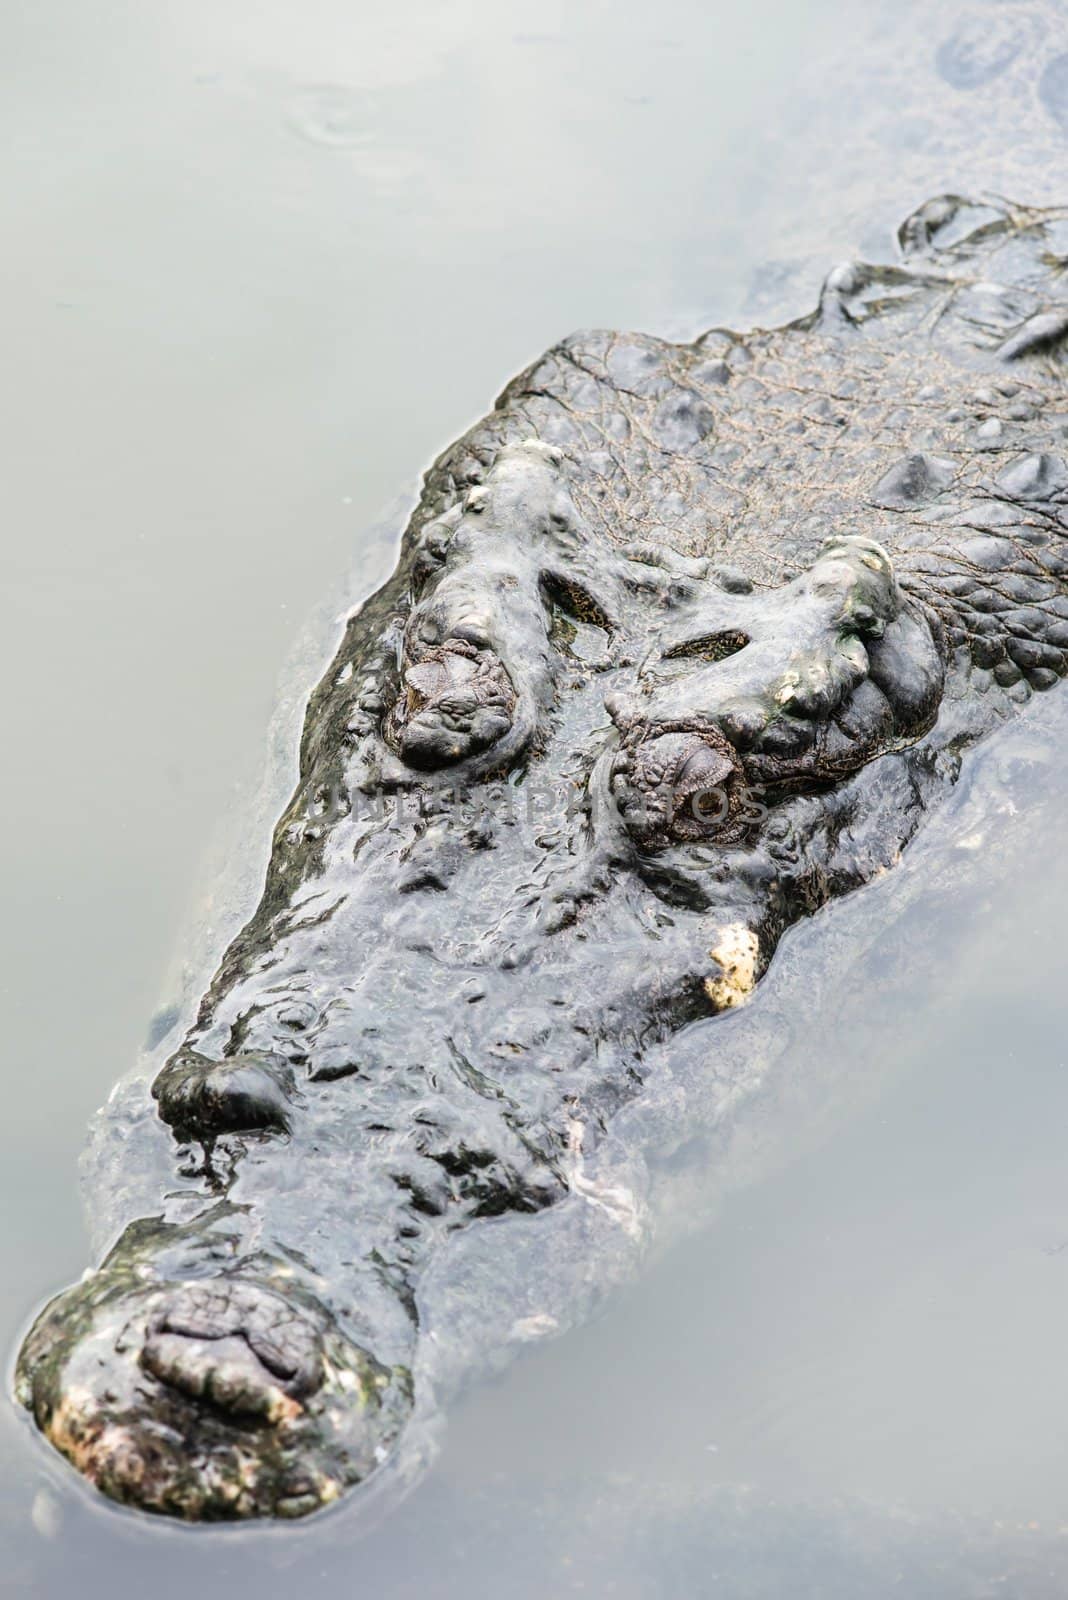 Large adult salt water crocodile in calm water close up by sasilsolutions